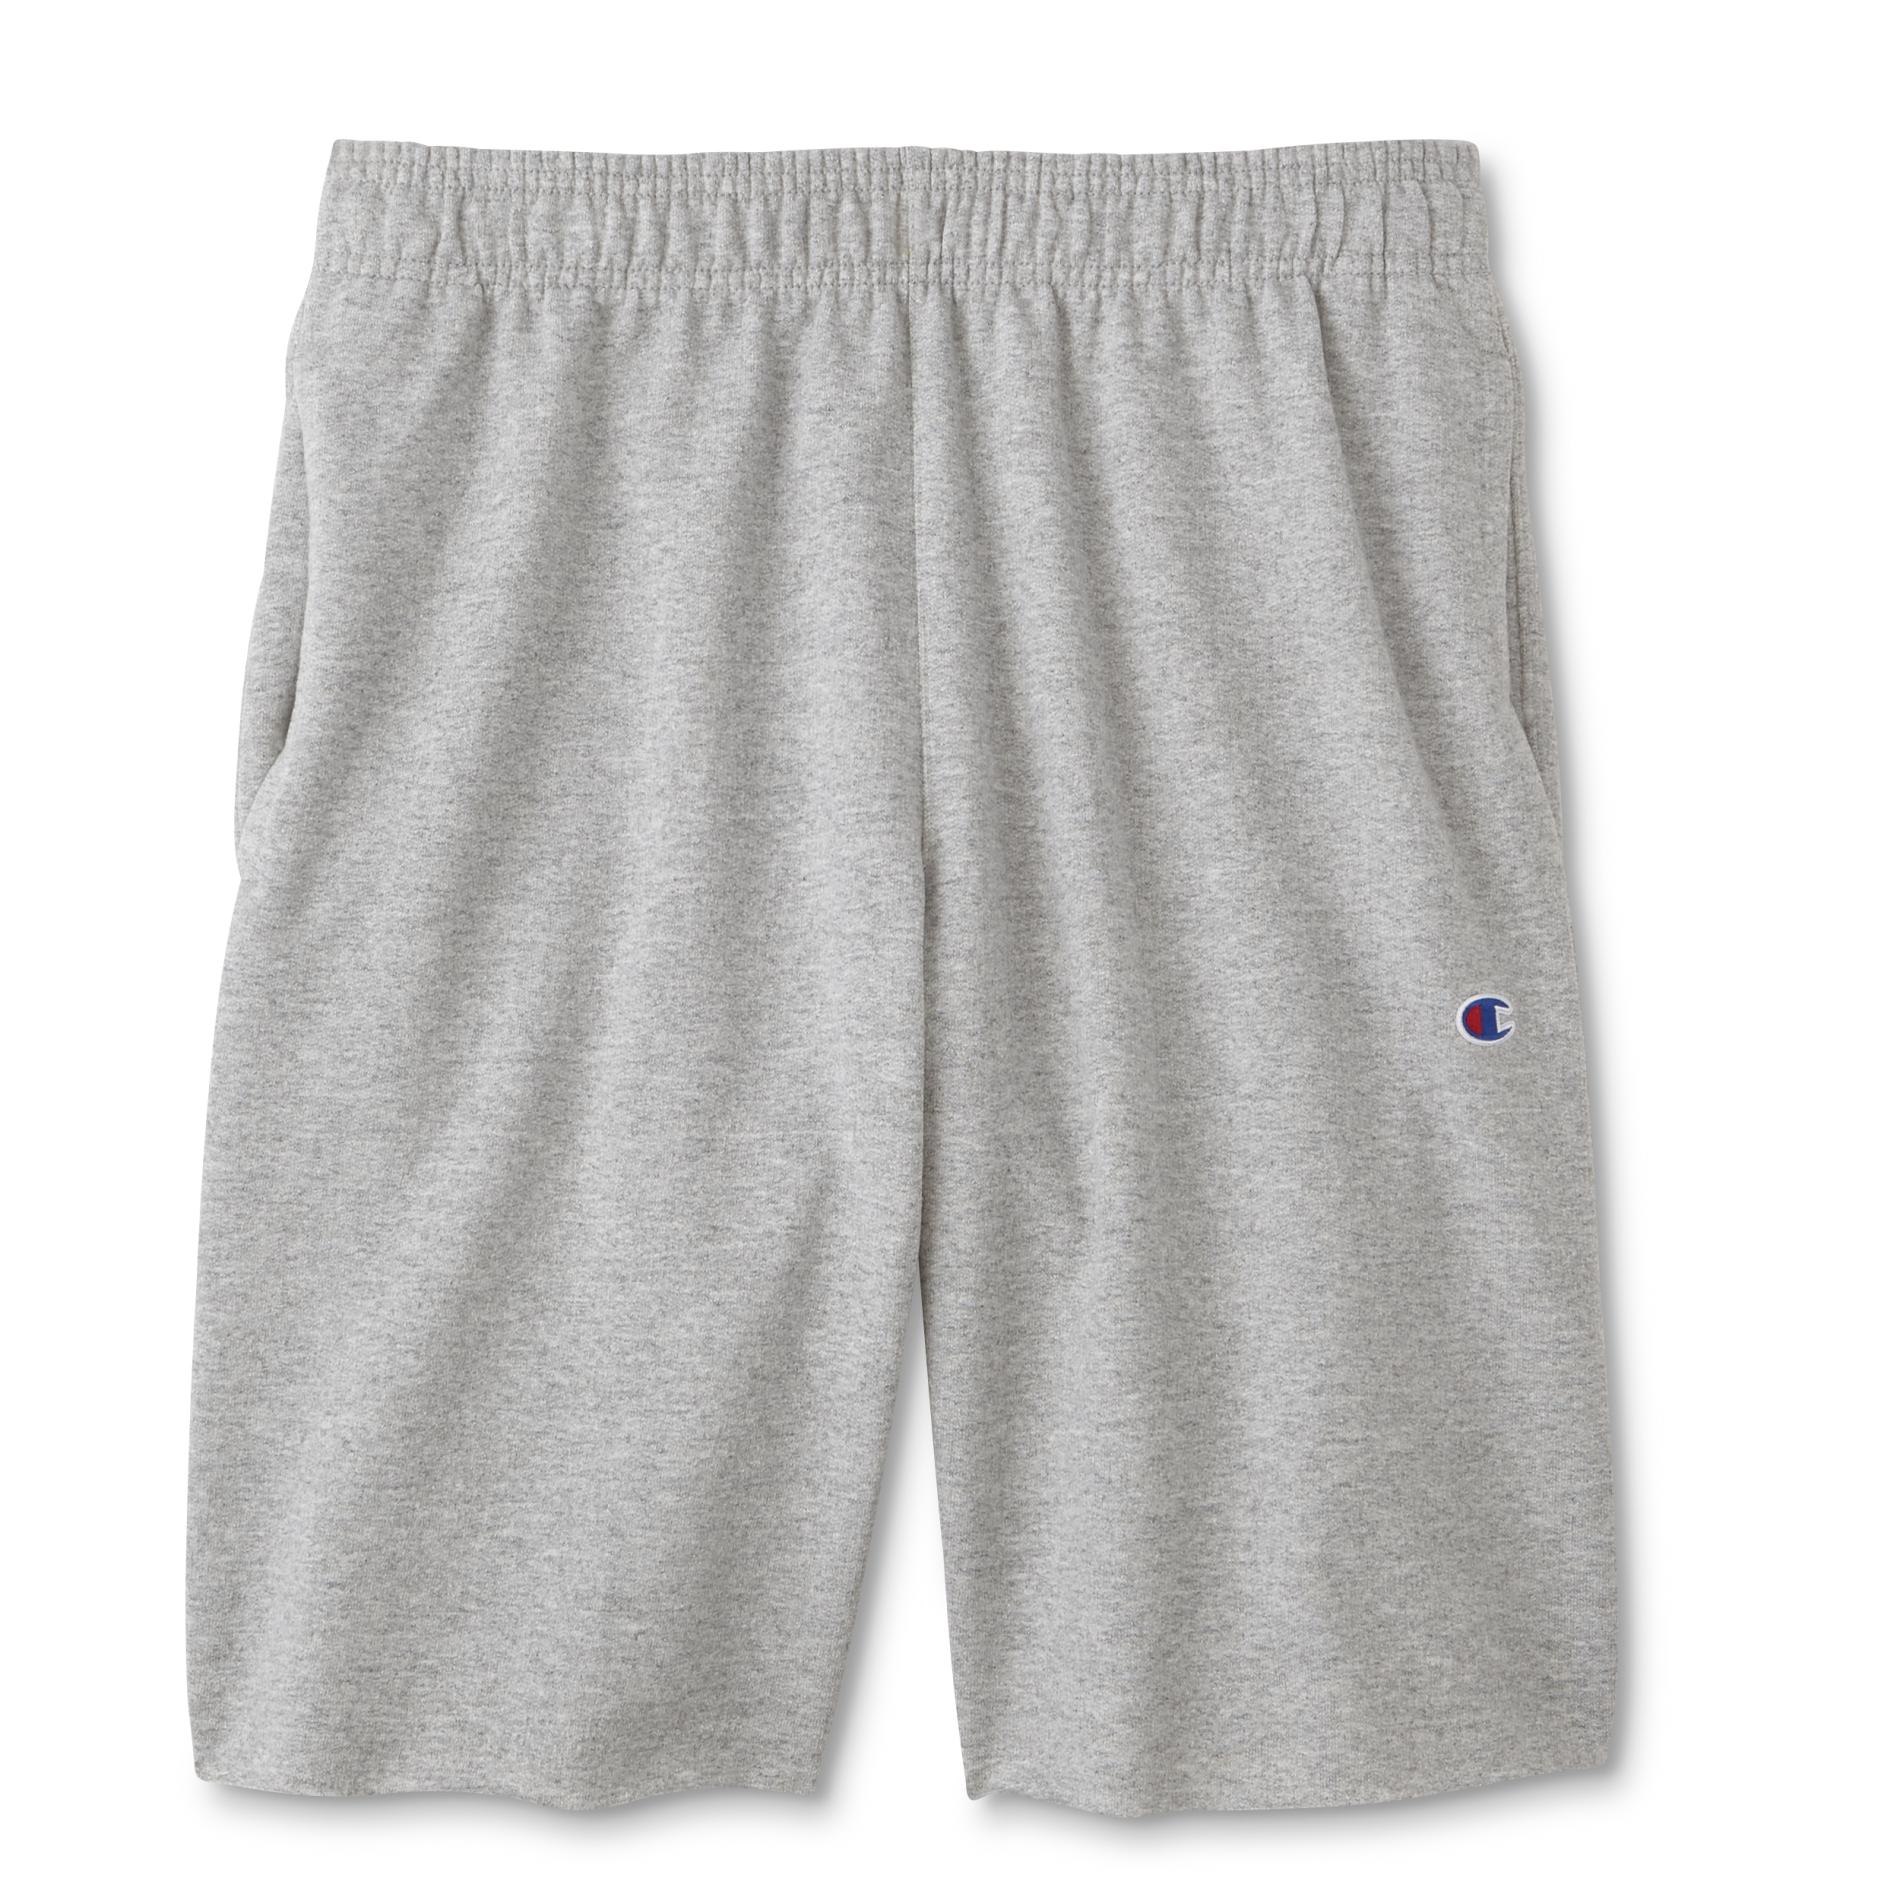 Champion Young Men's PowerBlend Athletic Shorts